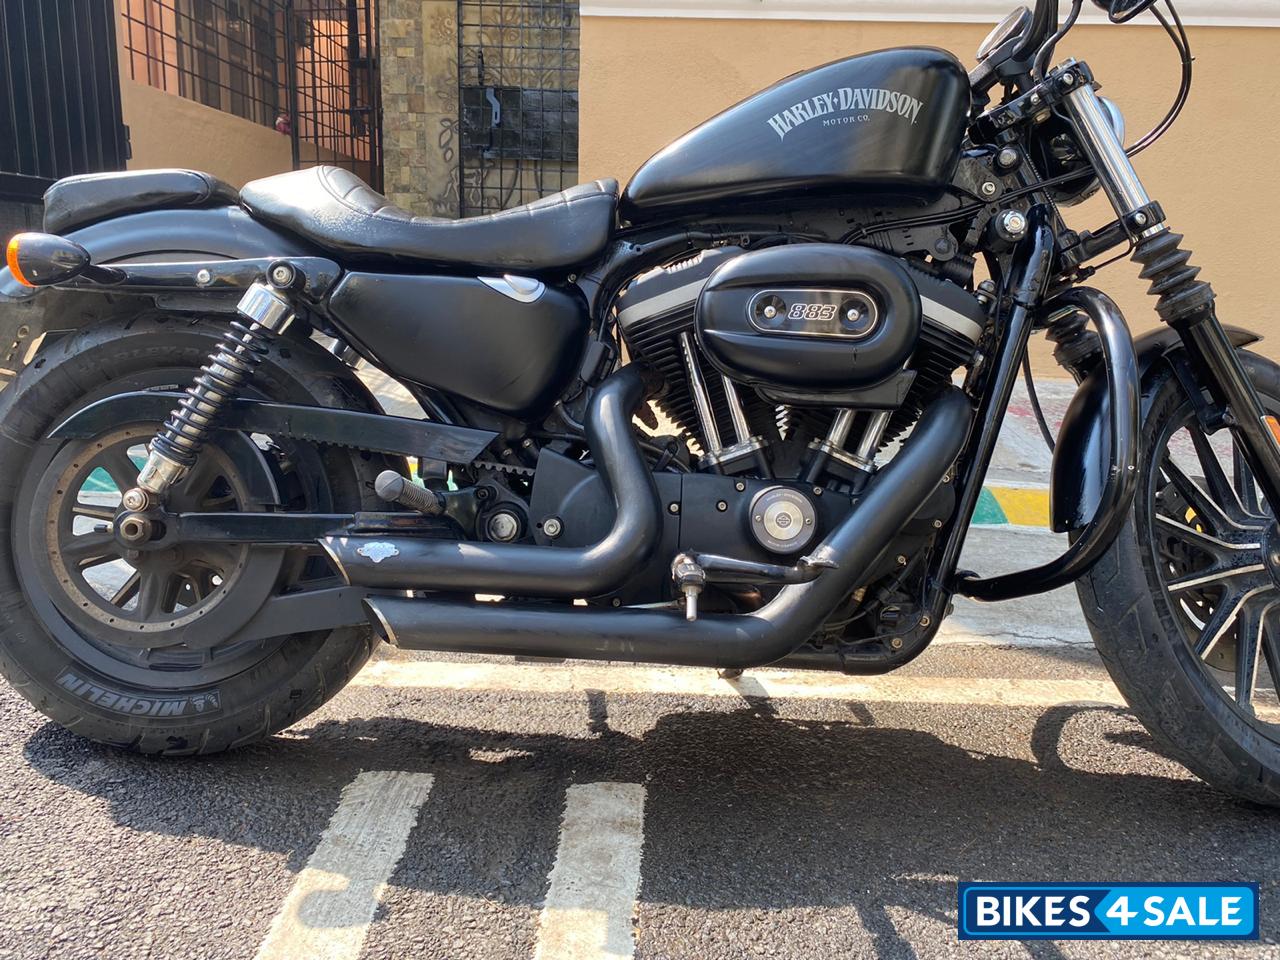 Used 2013 Model Harley Davidson Iron 883 For Sale In Bangalore Id 303723 Bikes4sale